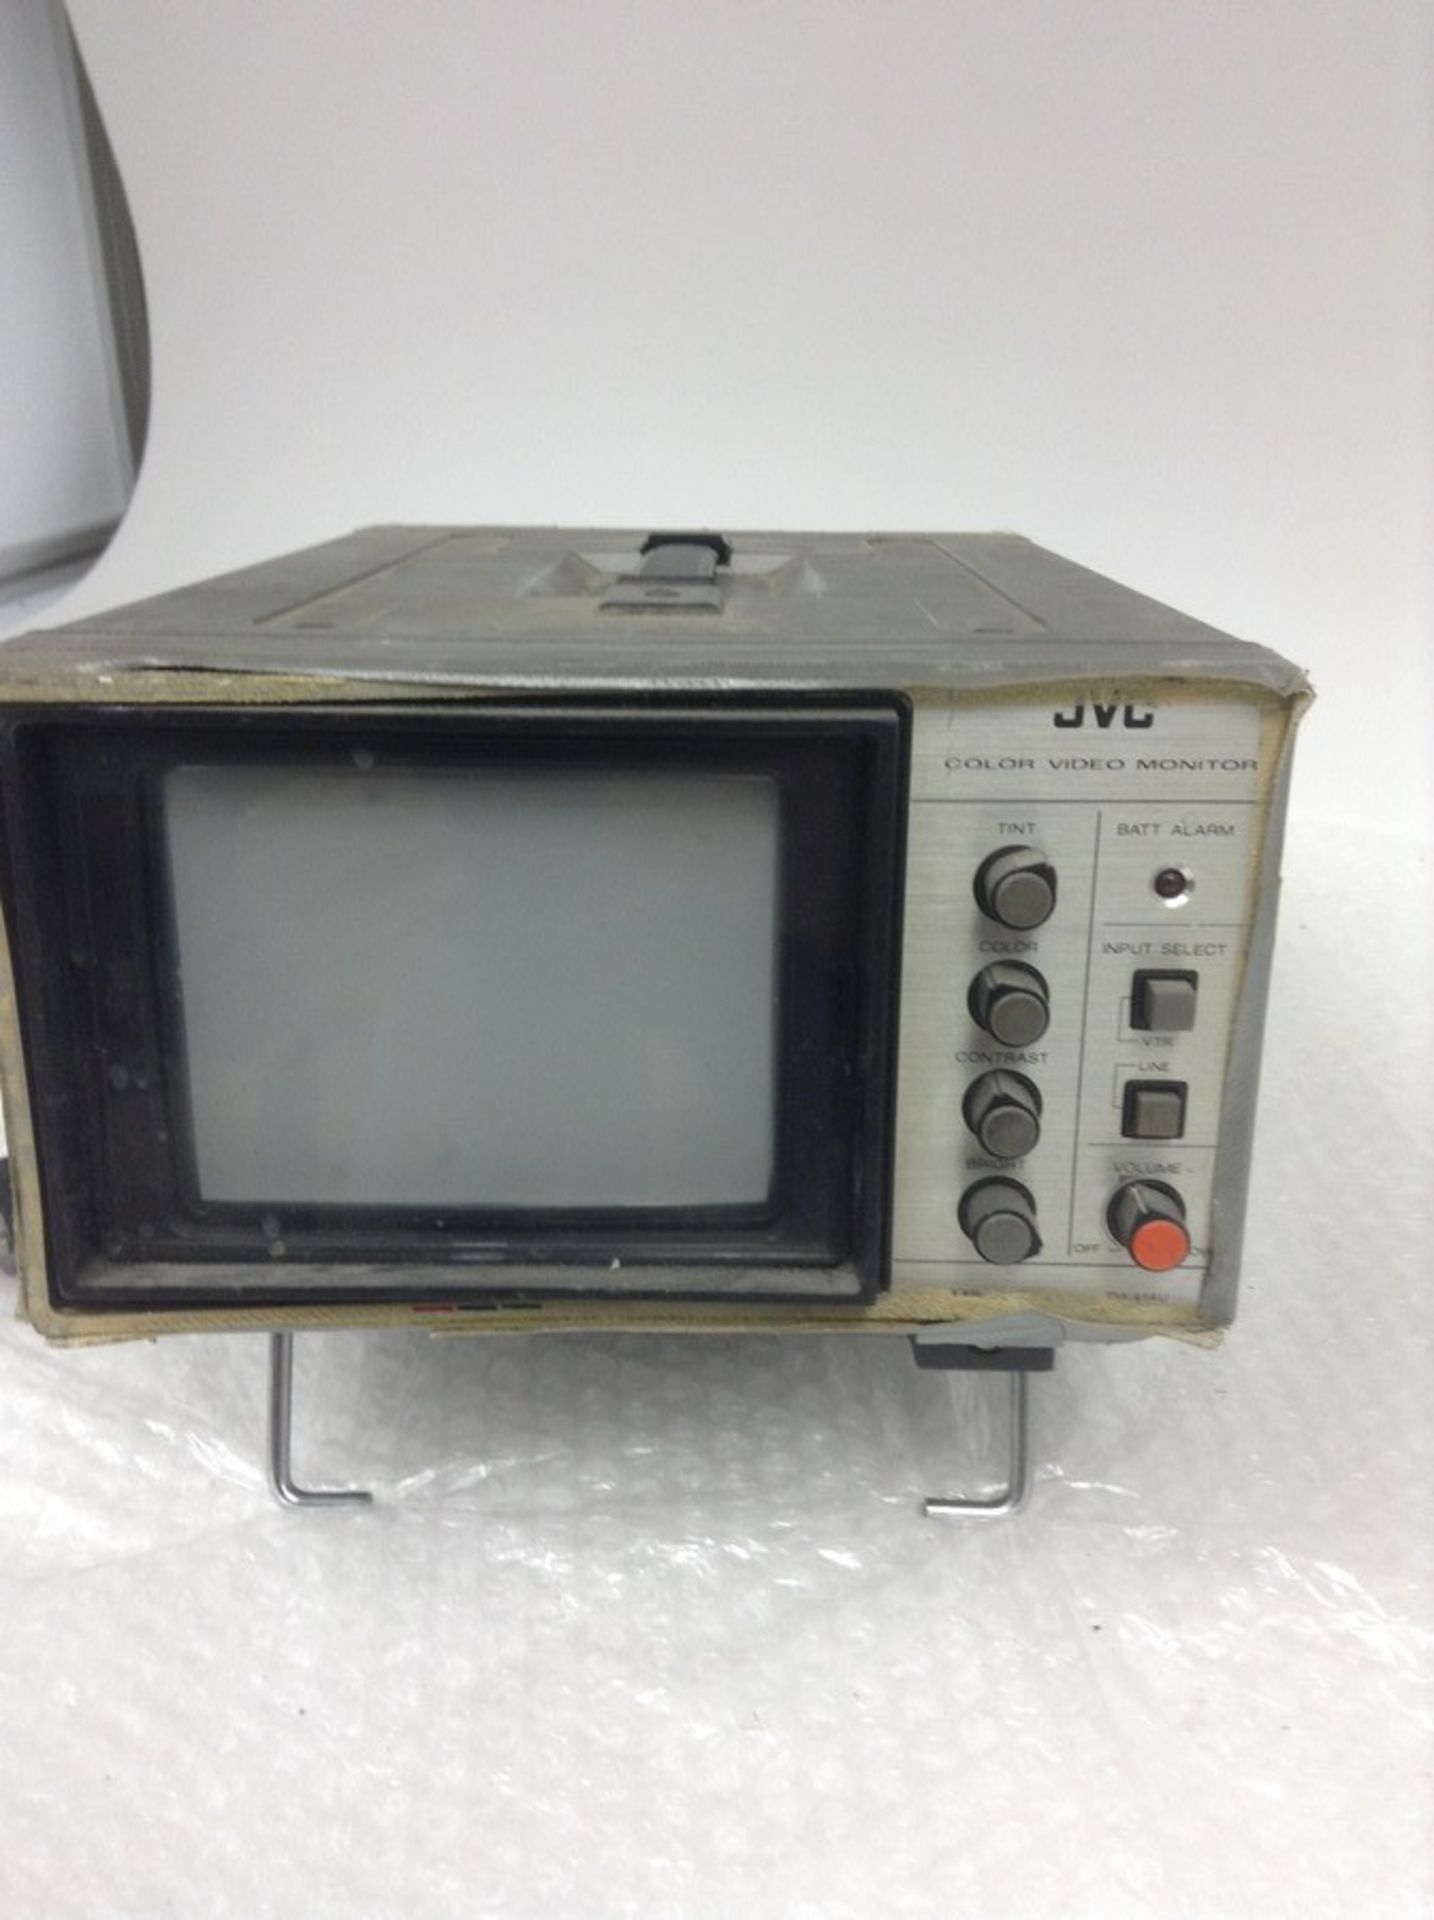 JVC TM-41AU Color Video Monitor Hand-held Portable Single Screen - Image 2 of 4